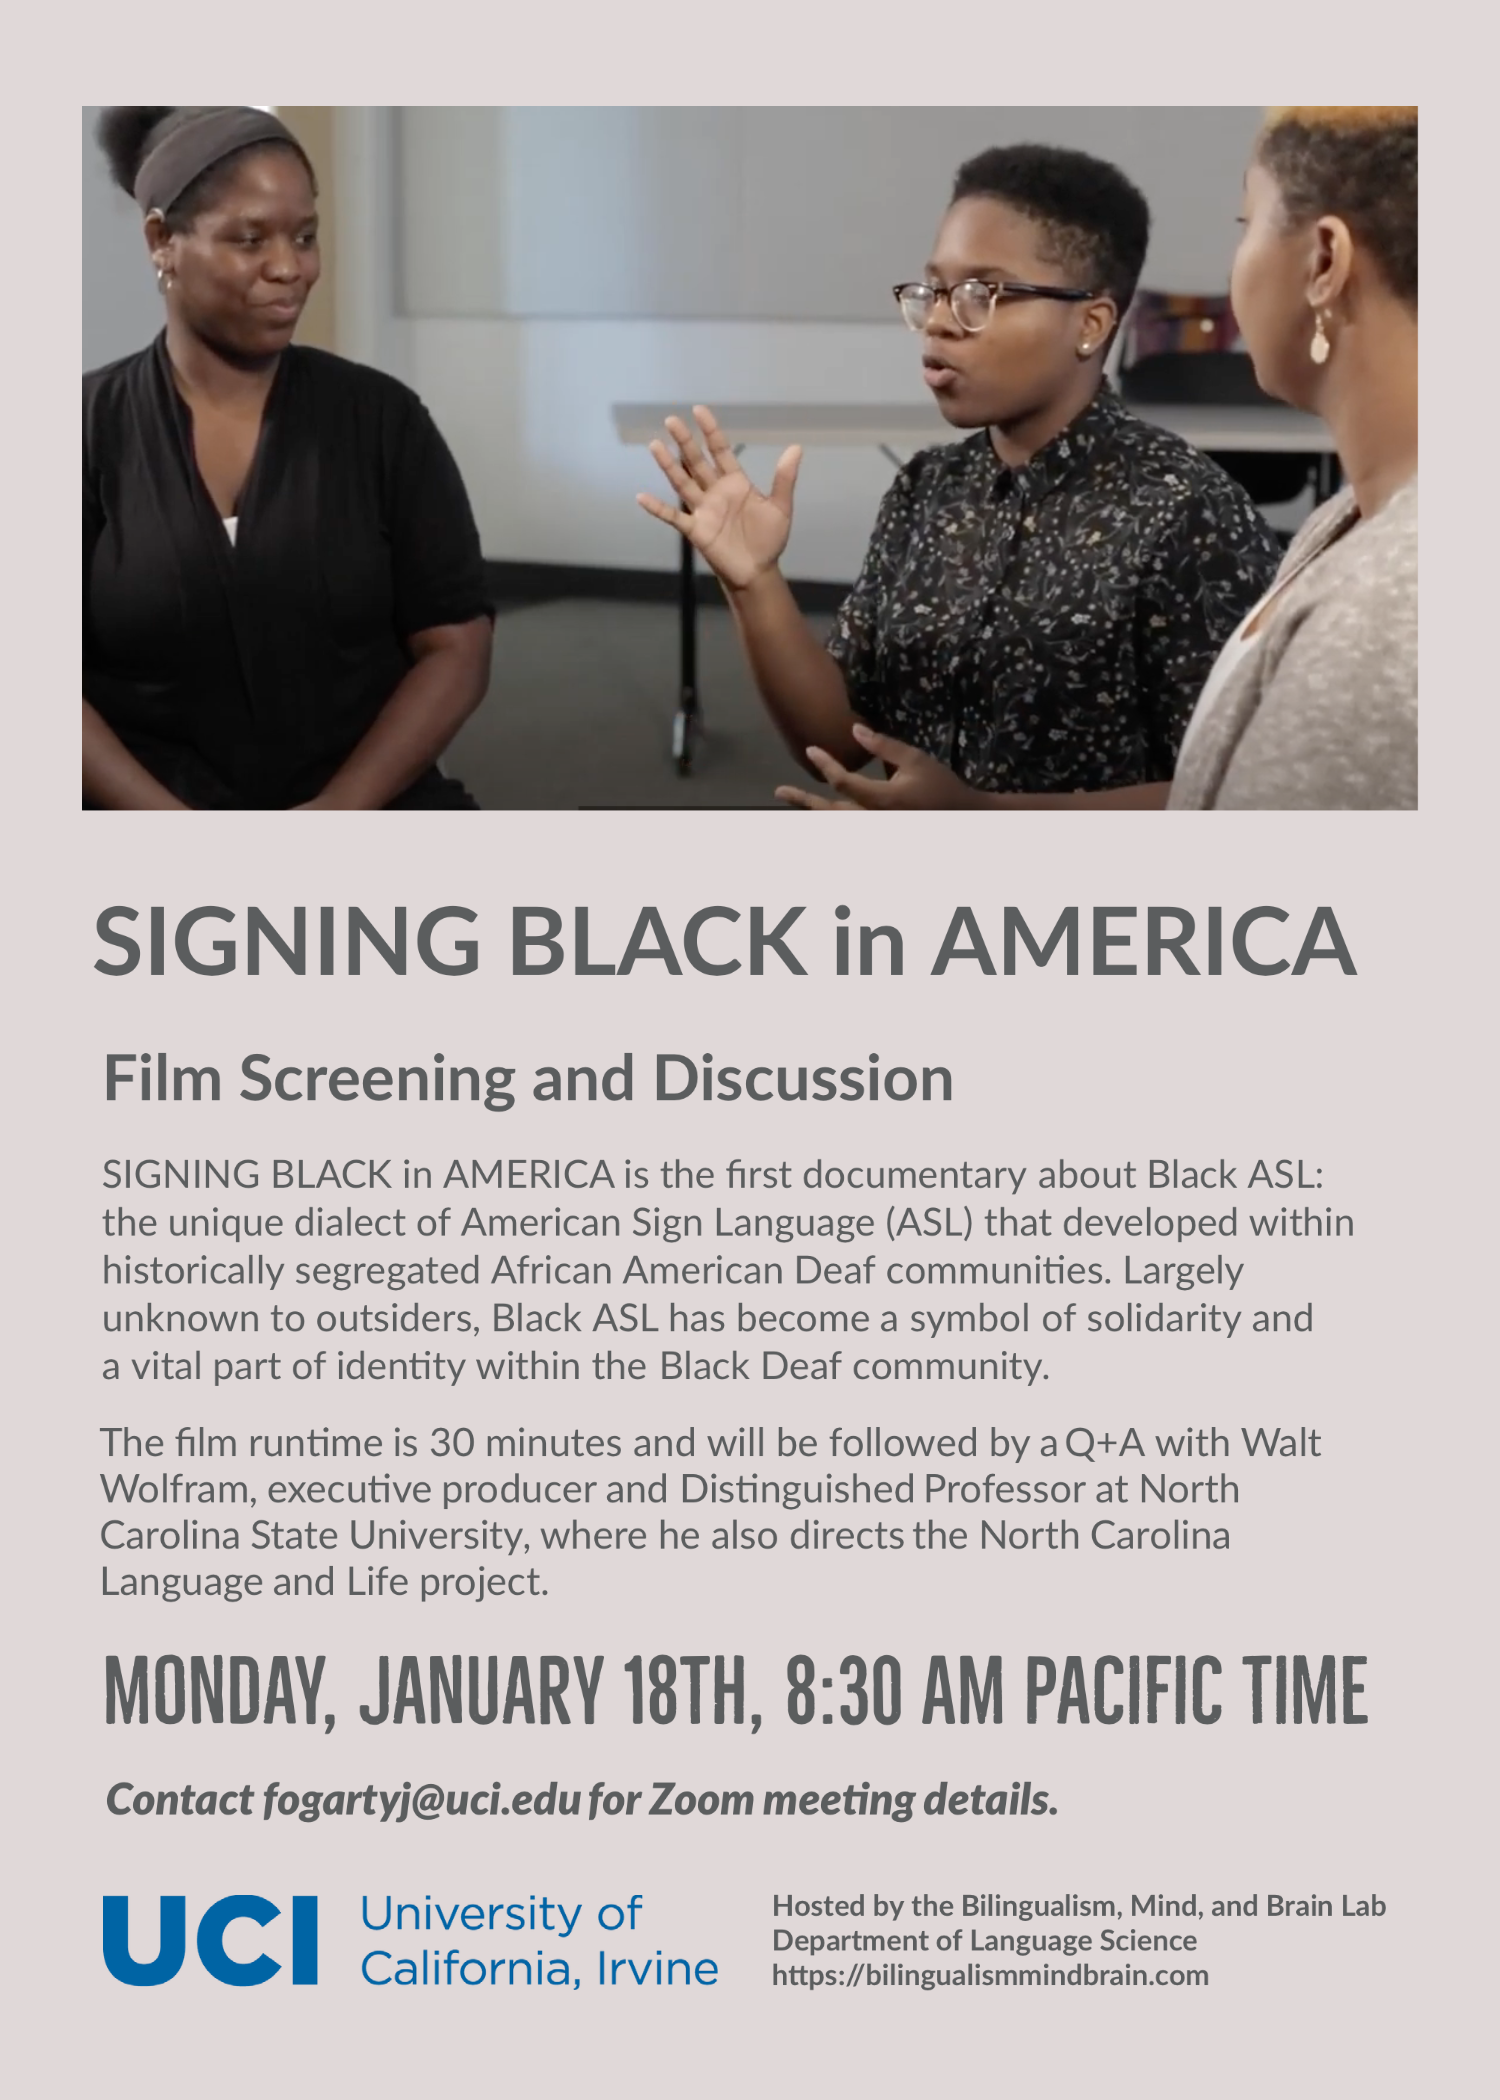 Signing Black in America Film Screening and Discussion